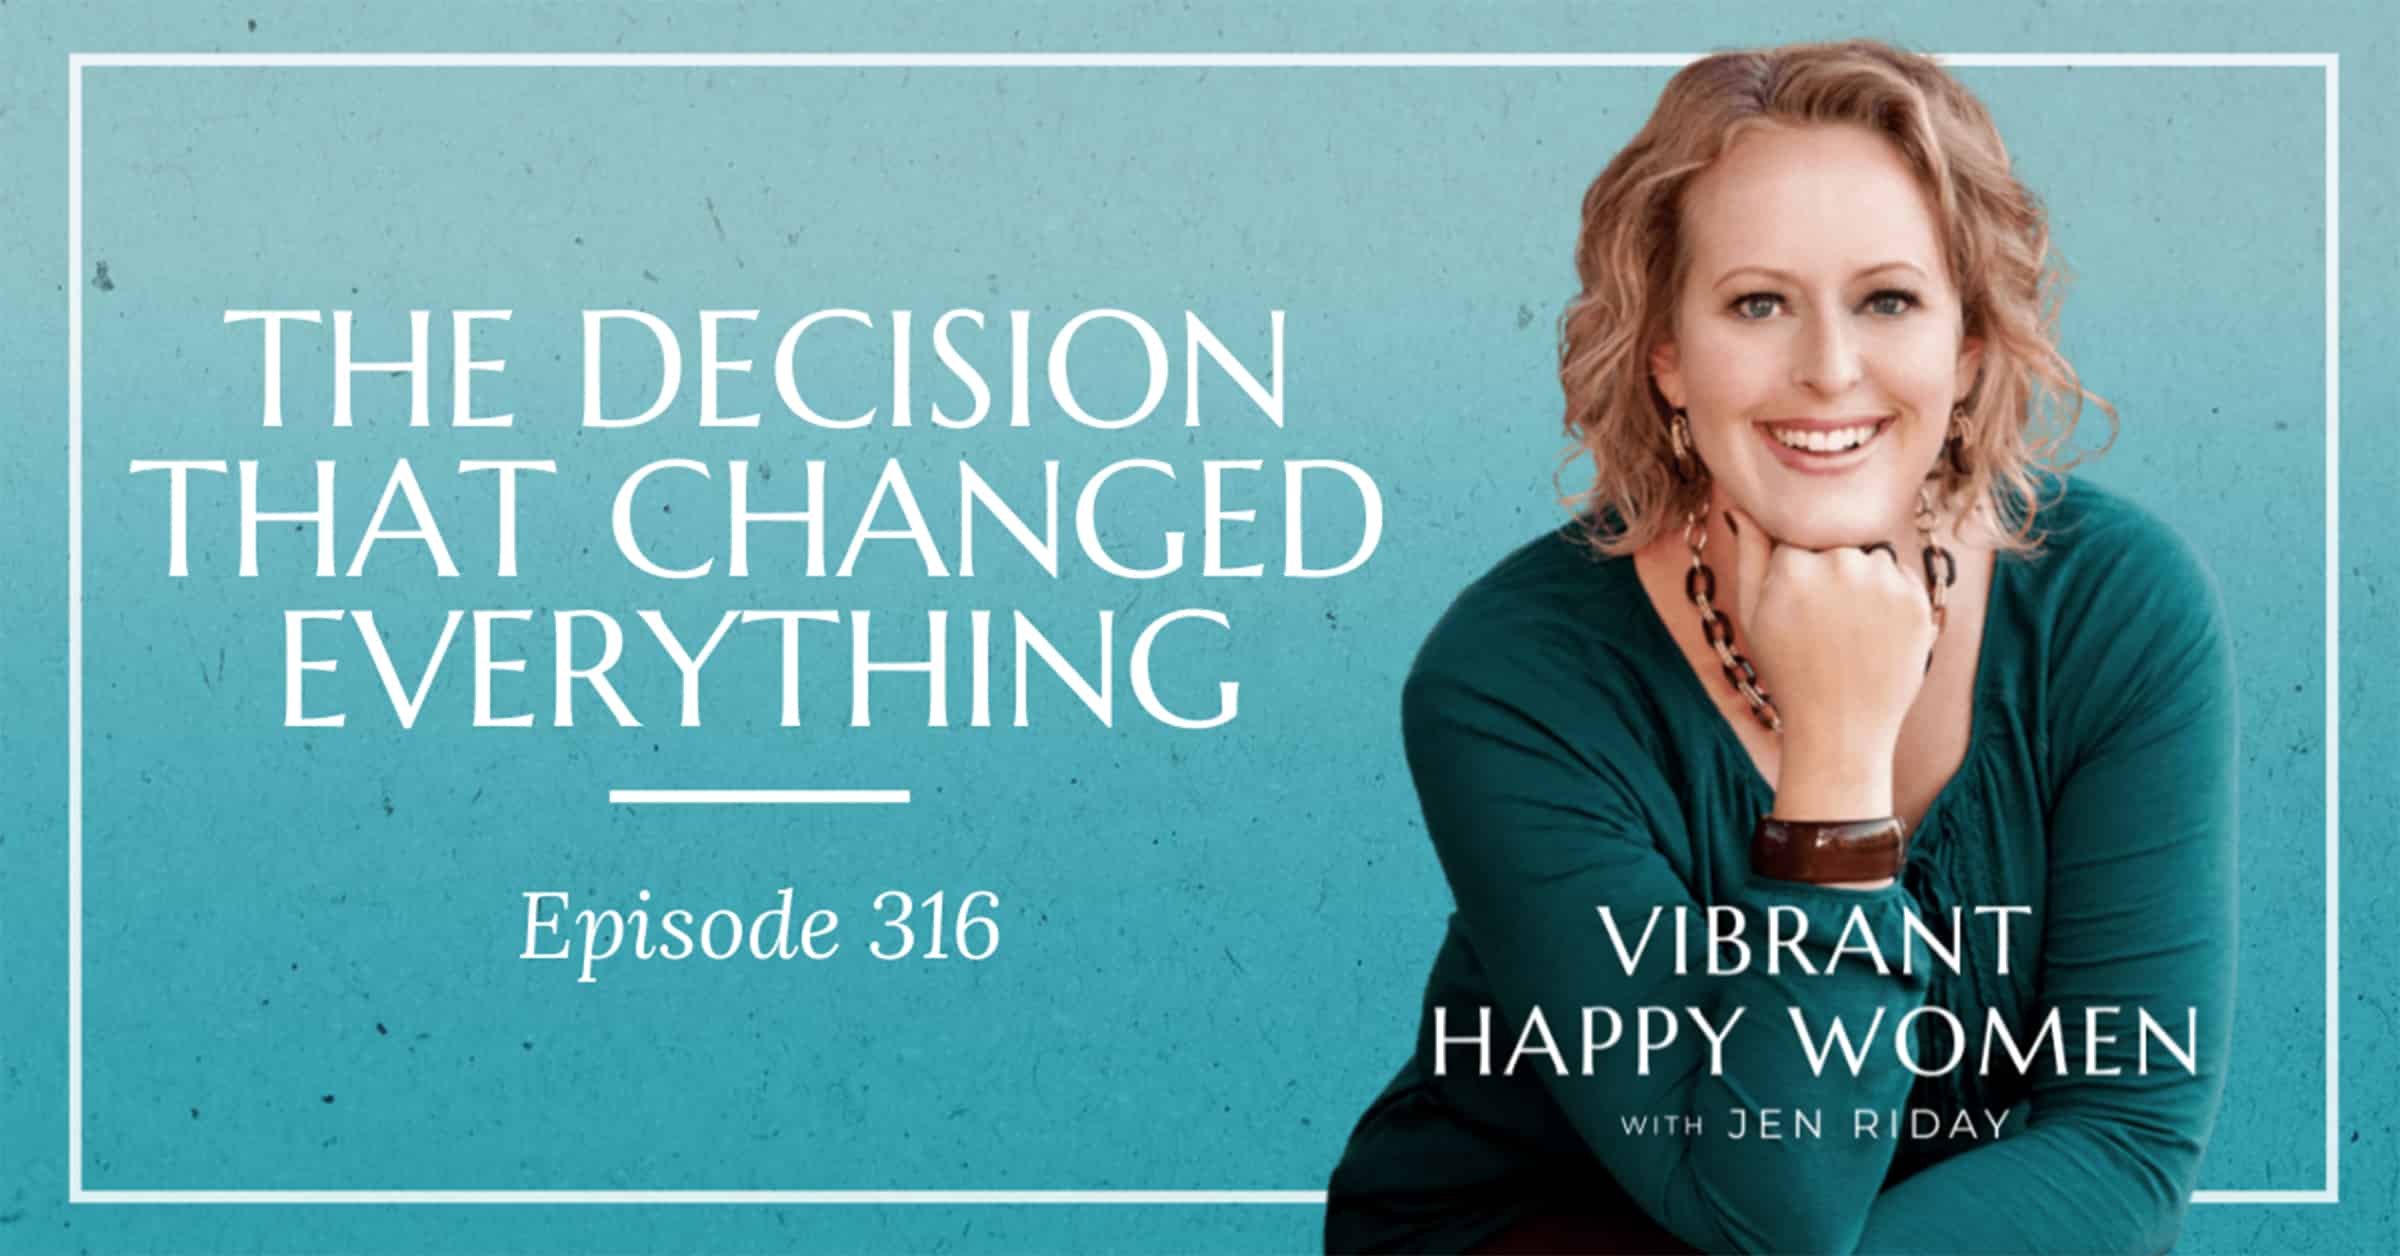 Vibrant Happy Women with Dr. Jen Riday | The Decision That Changed Everything